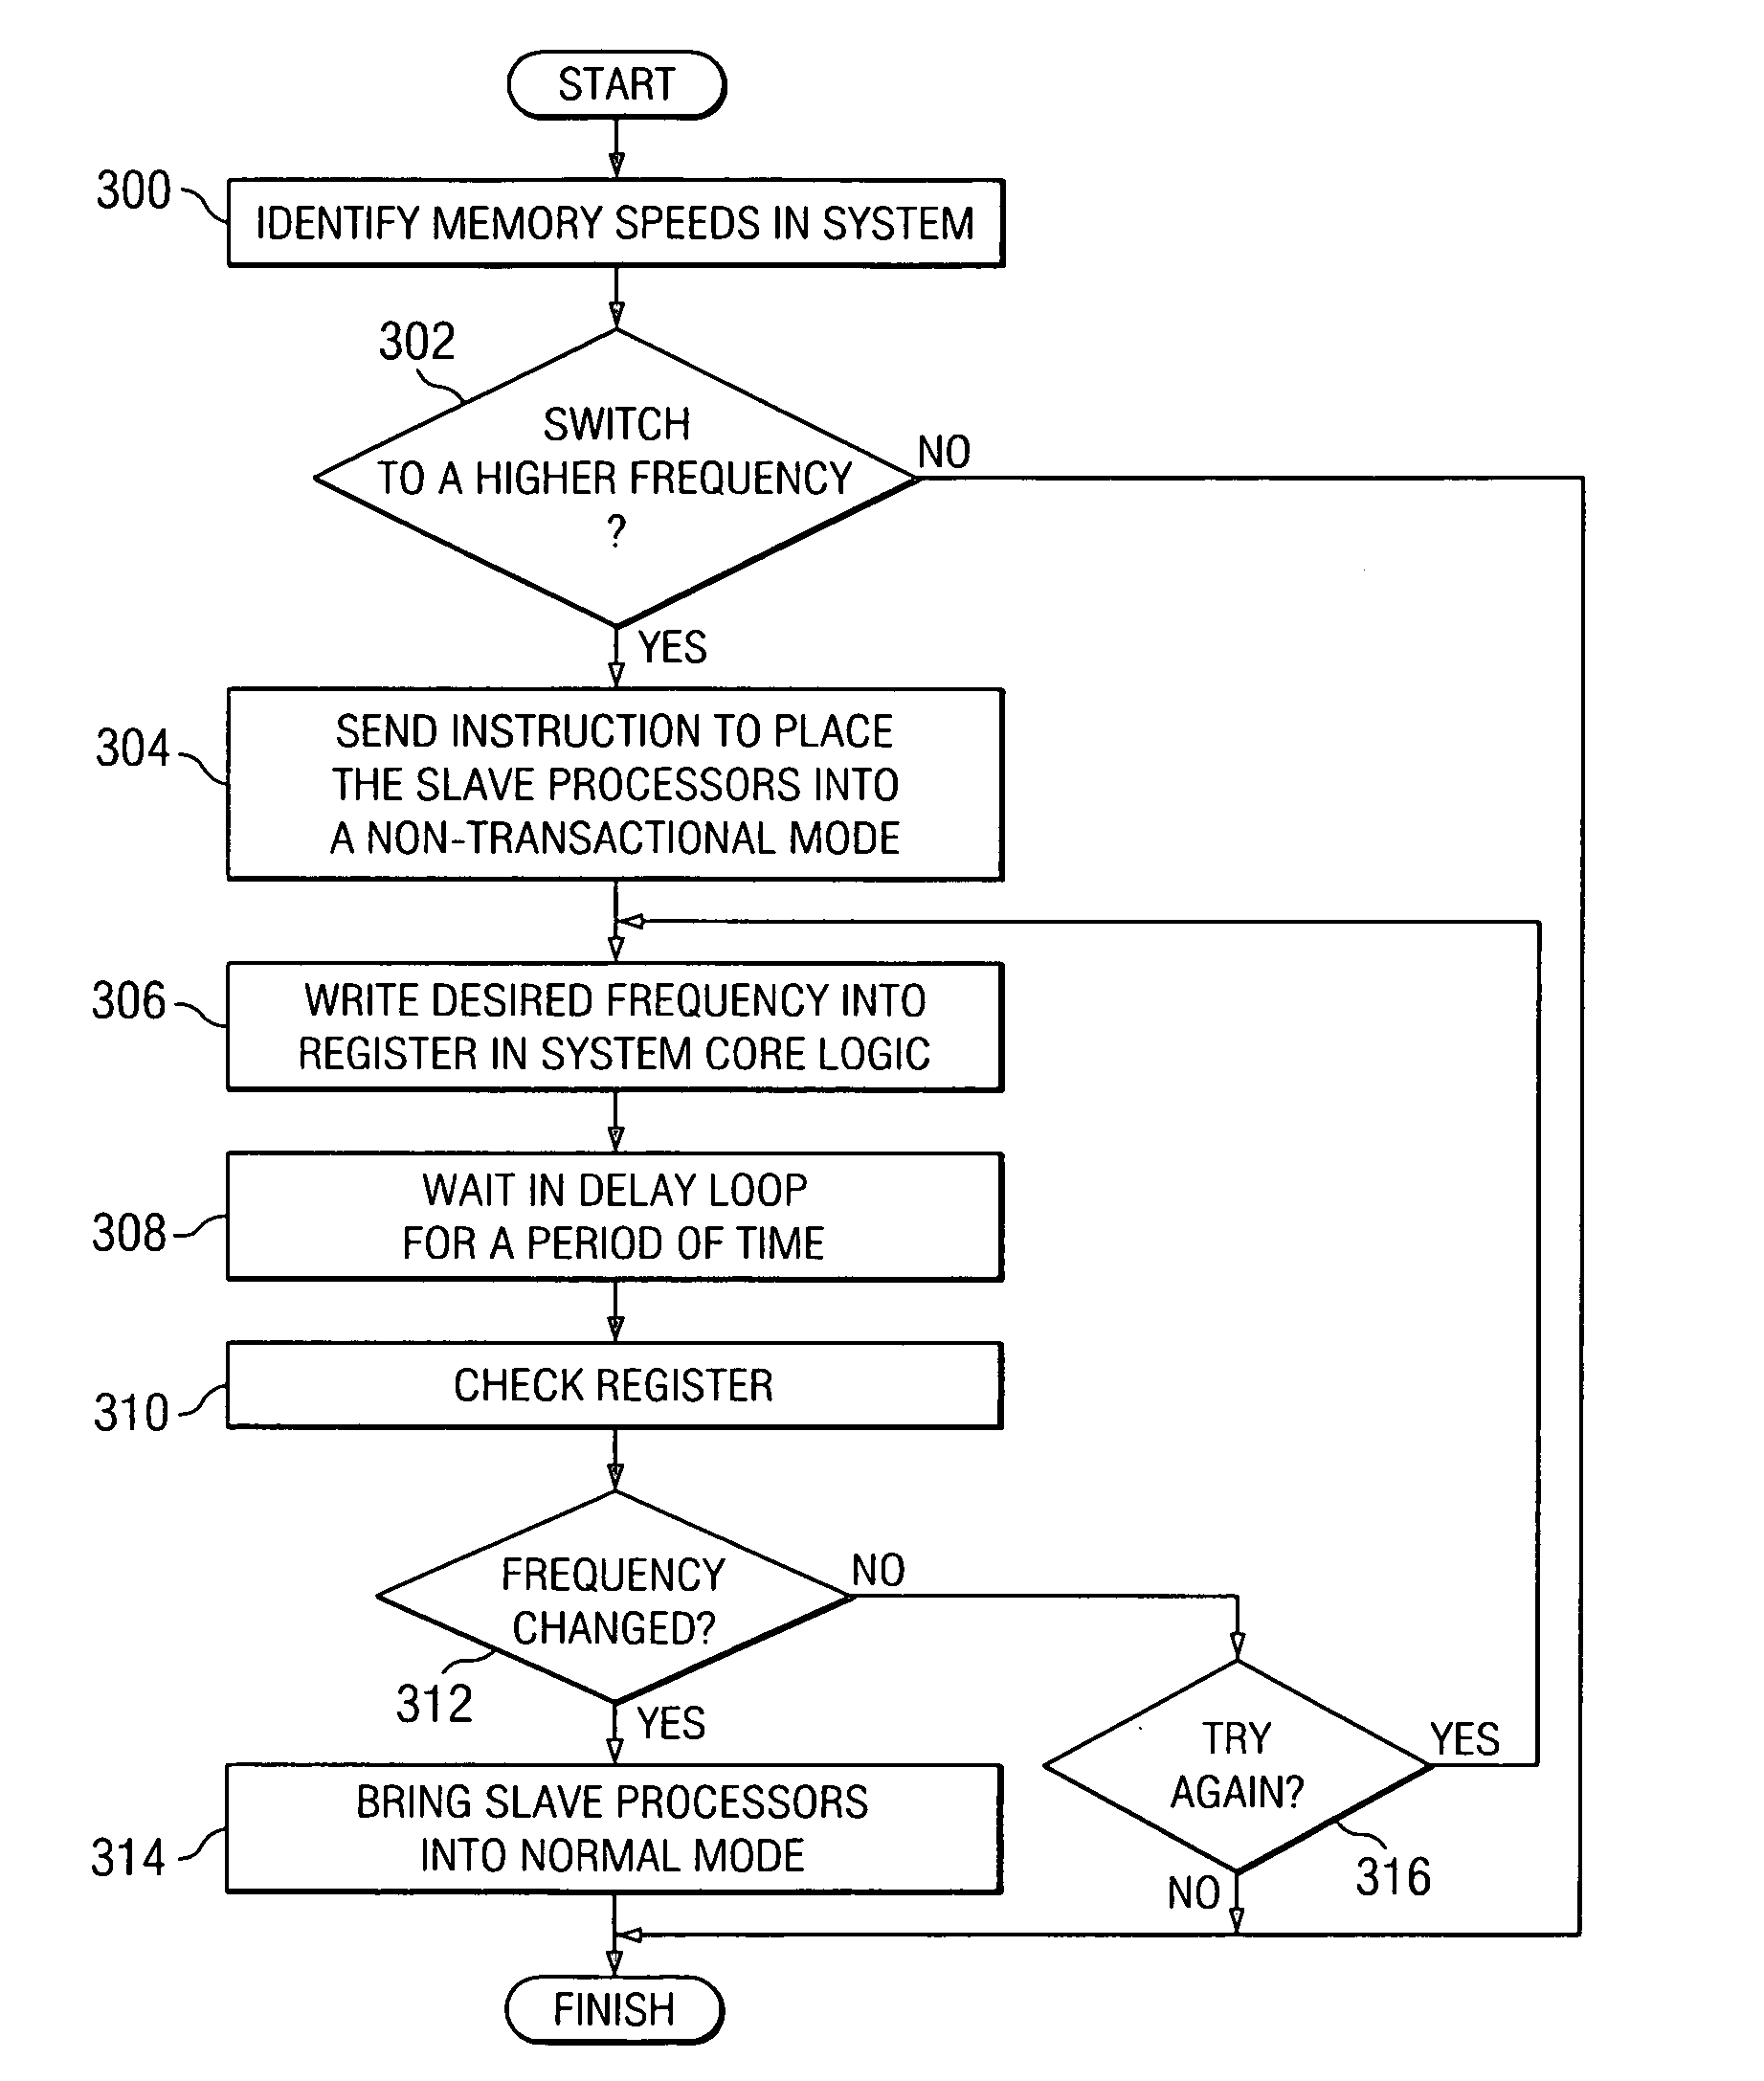 Method and apparatus to change the operating frequency of system core logic to maximize system memory bandwidth